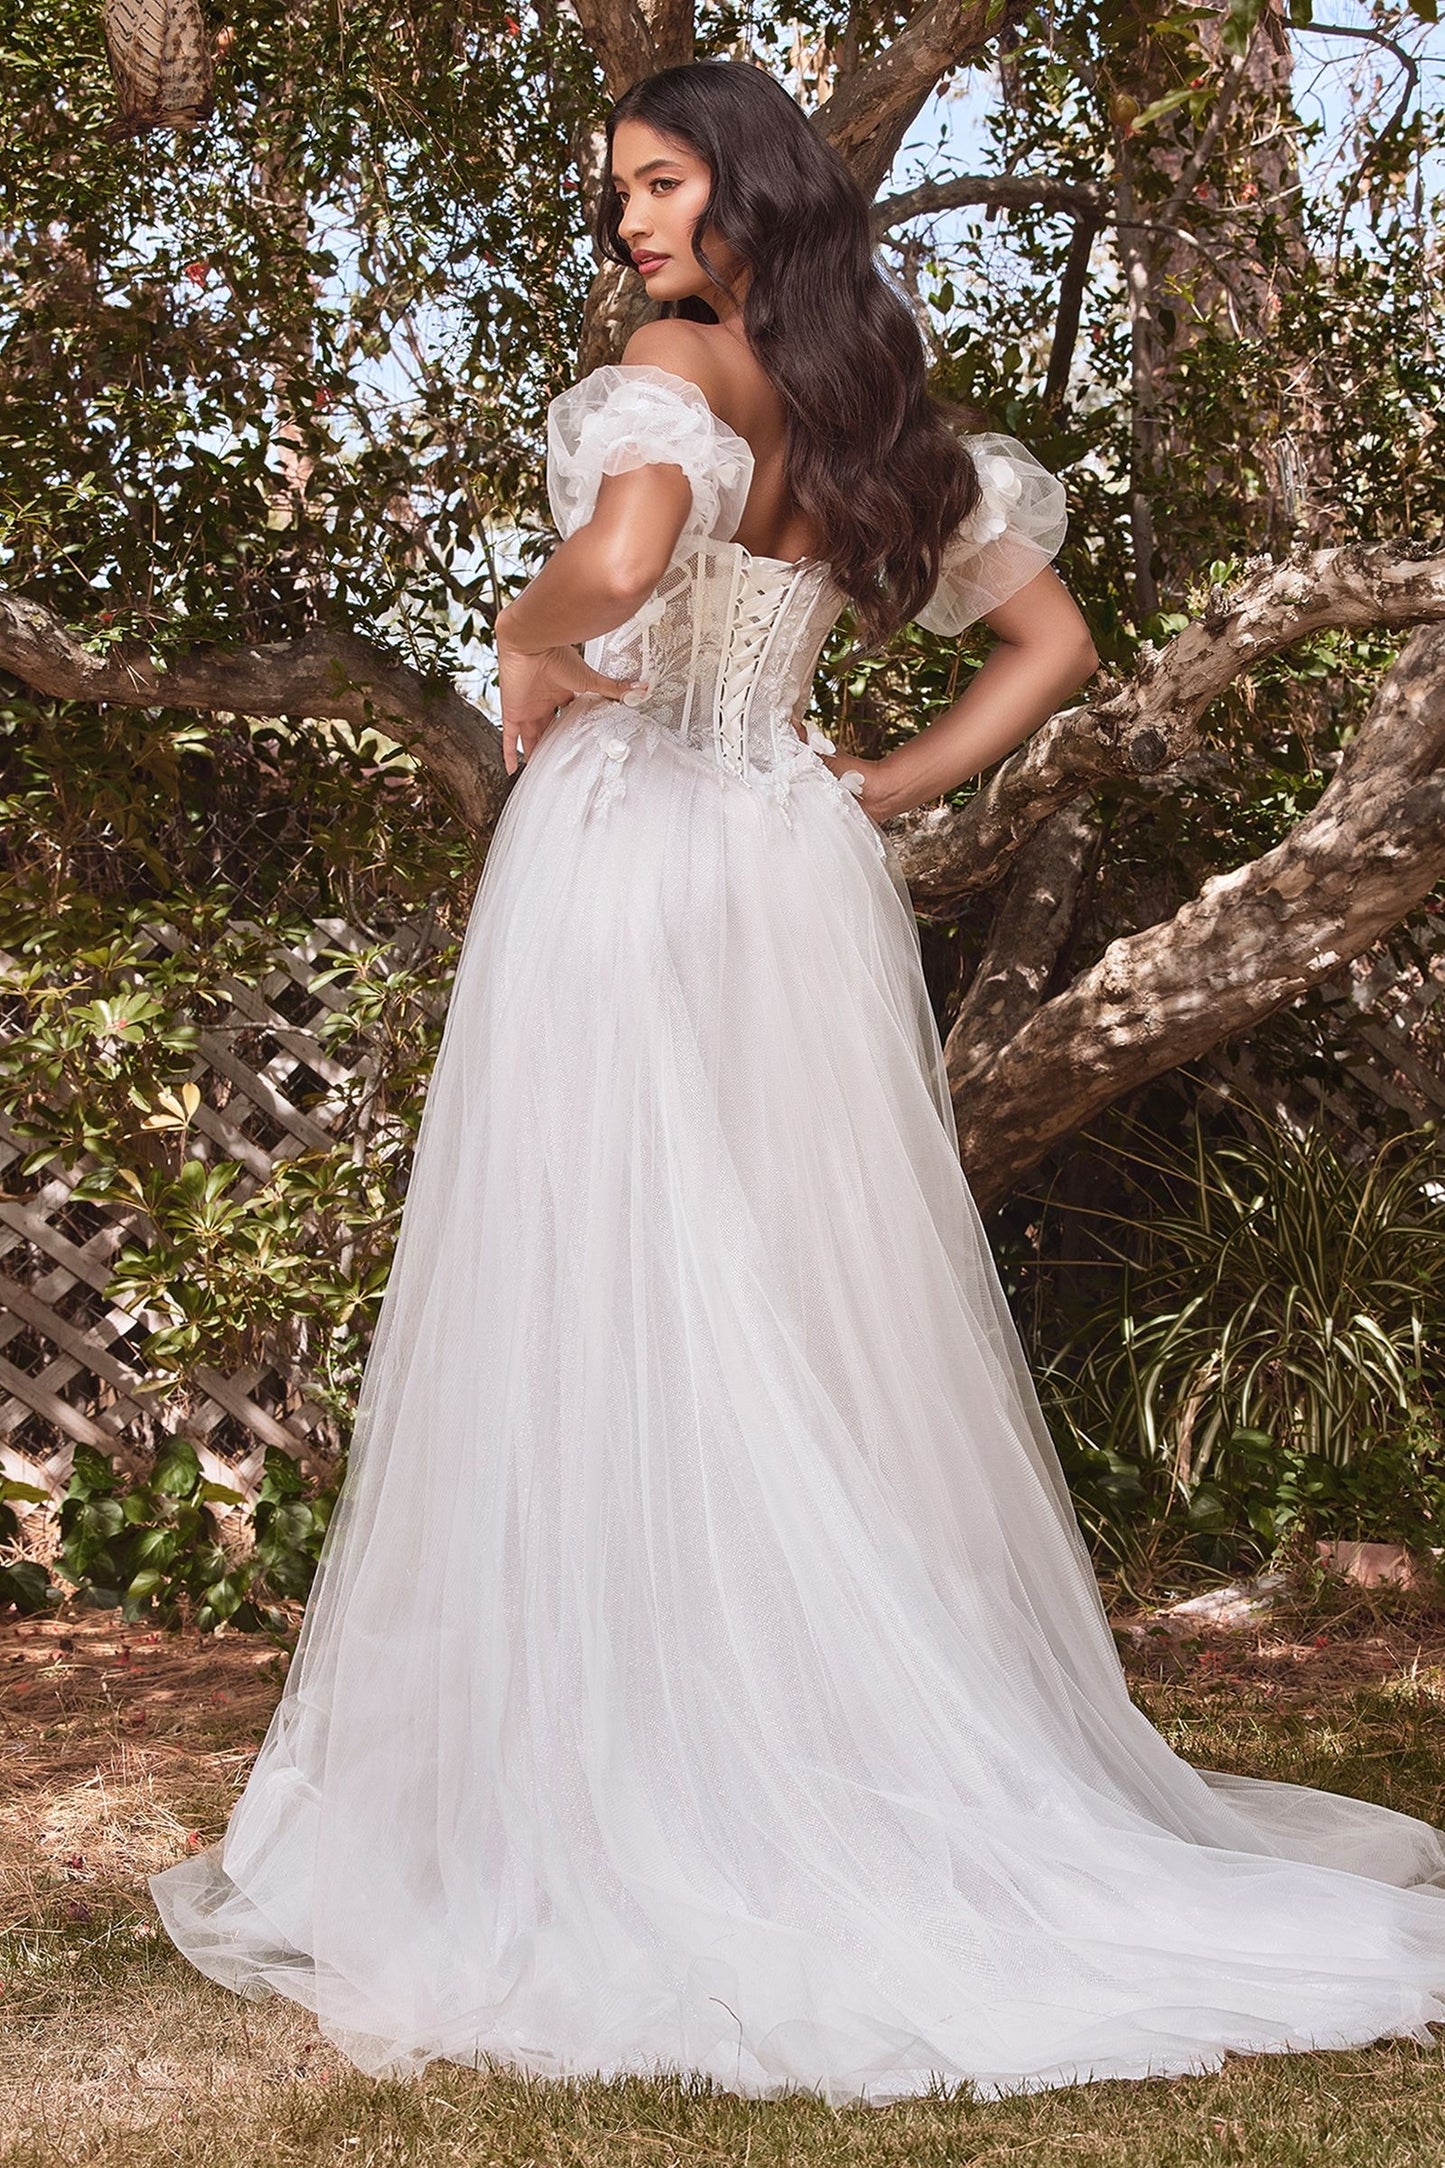 Enchanting bridal gown adorned with beautiful floral appliques